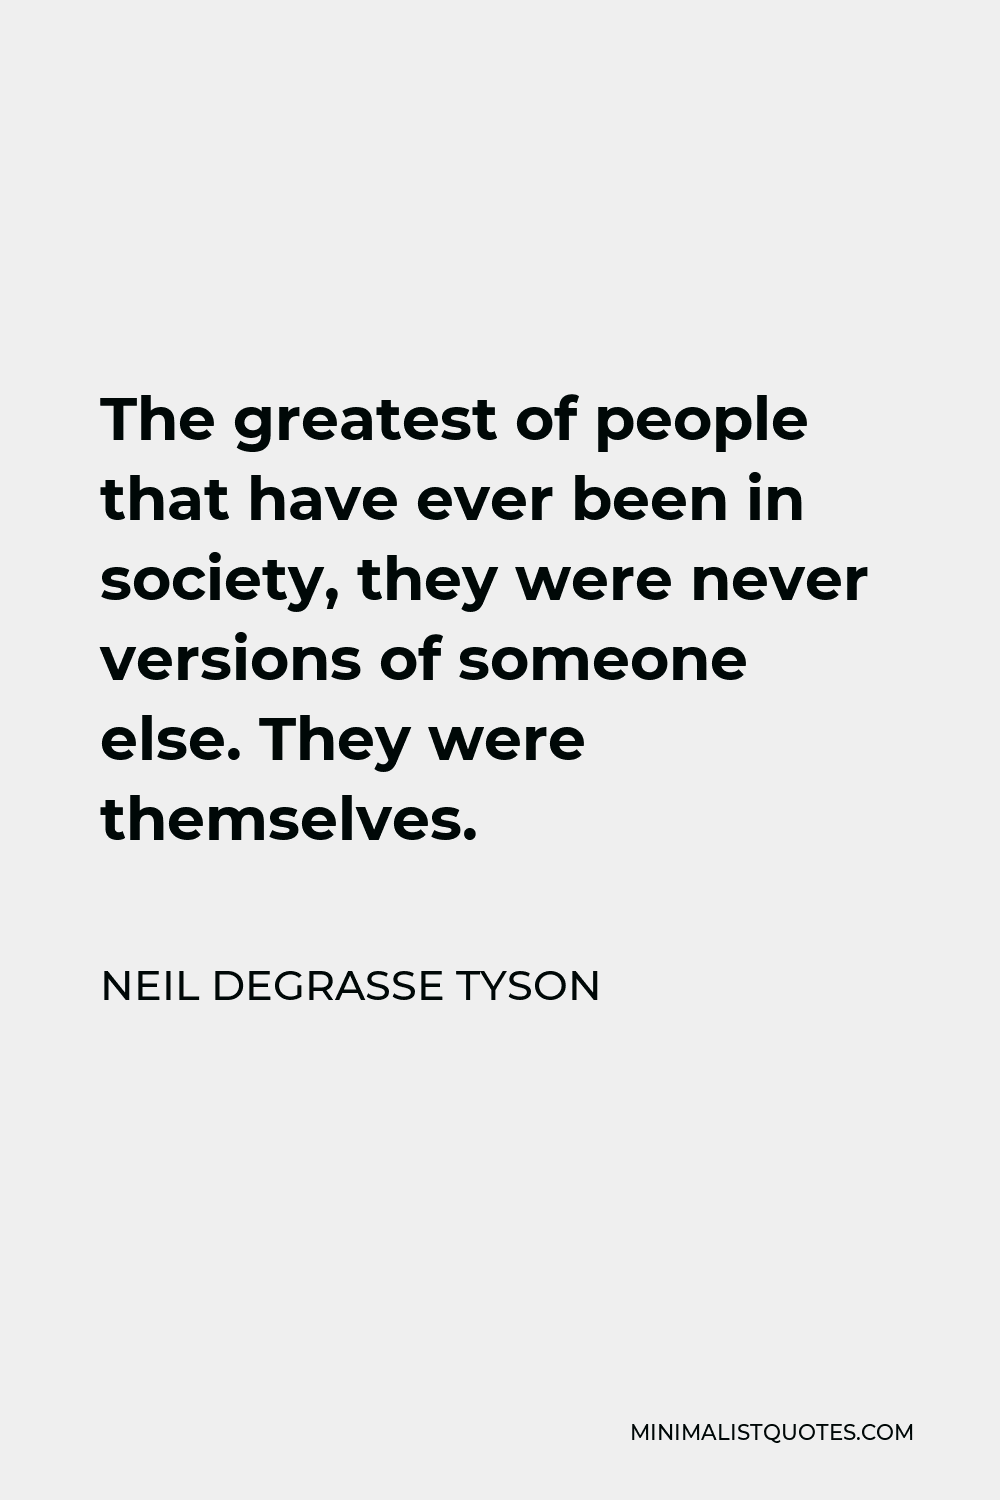 Neil deGrasse Tyson Quote - The greatest of people that have ever been in society, they were never versions of someone else. They were themselves.